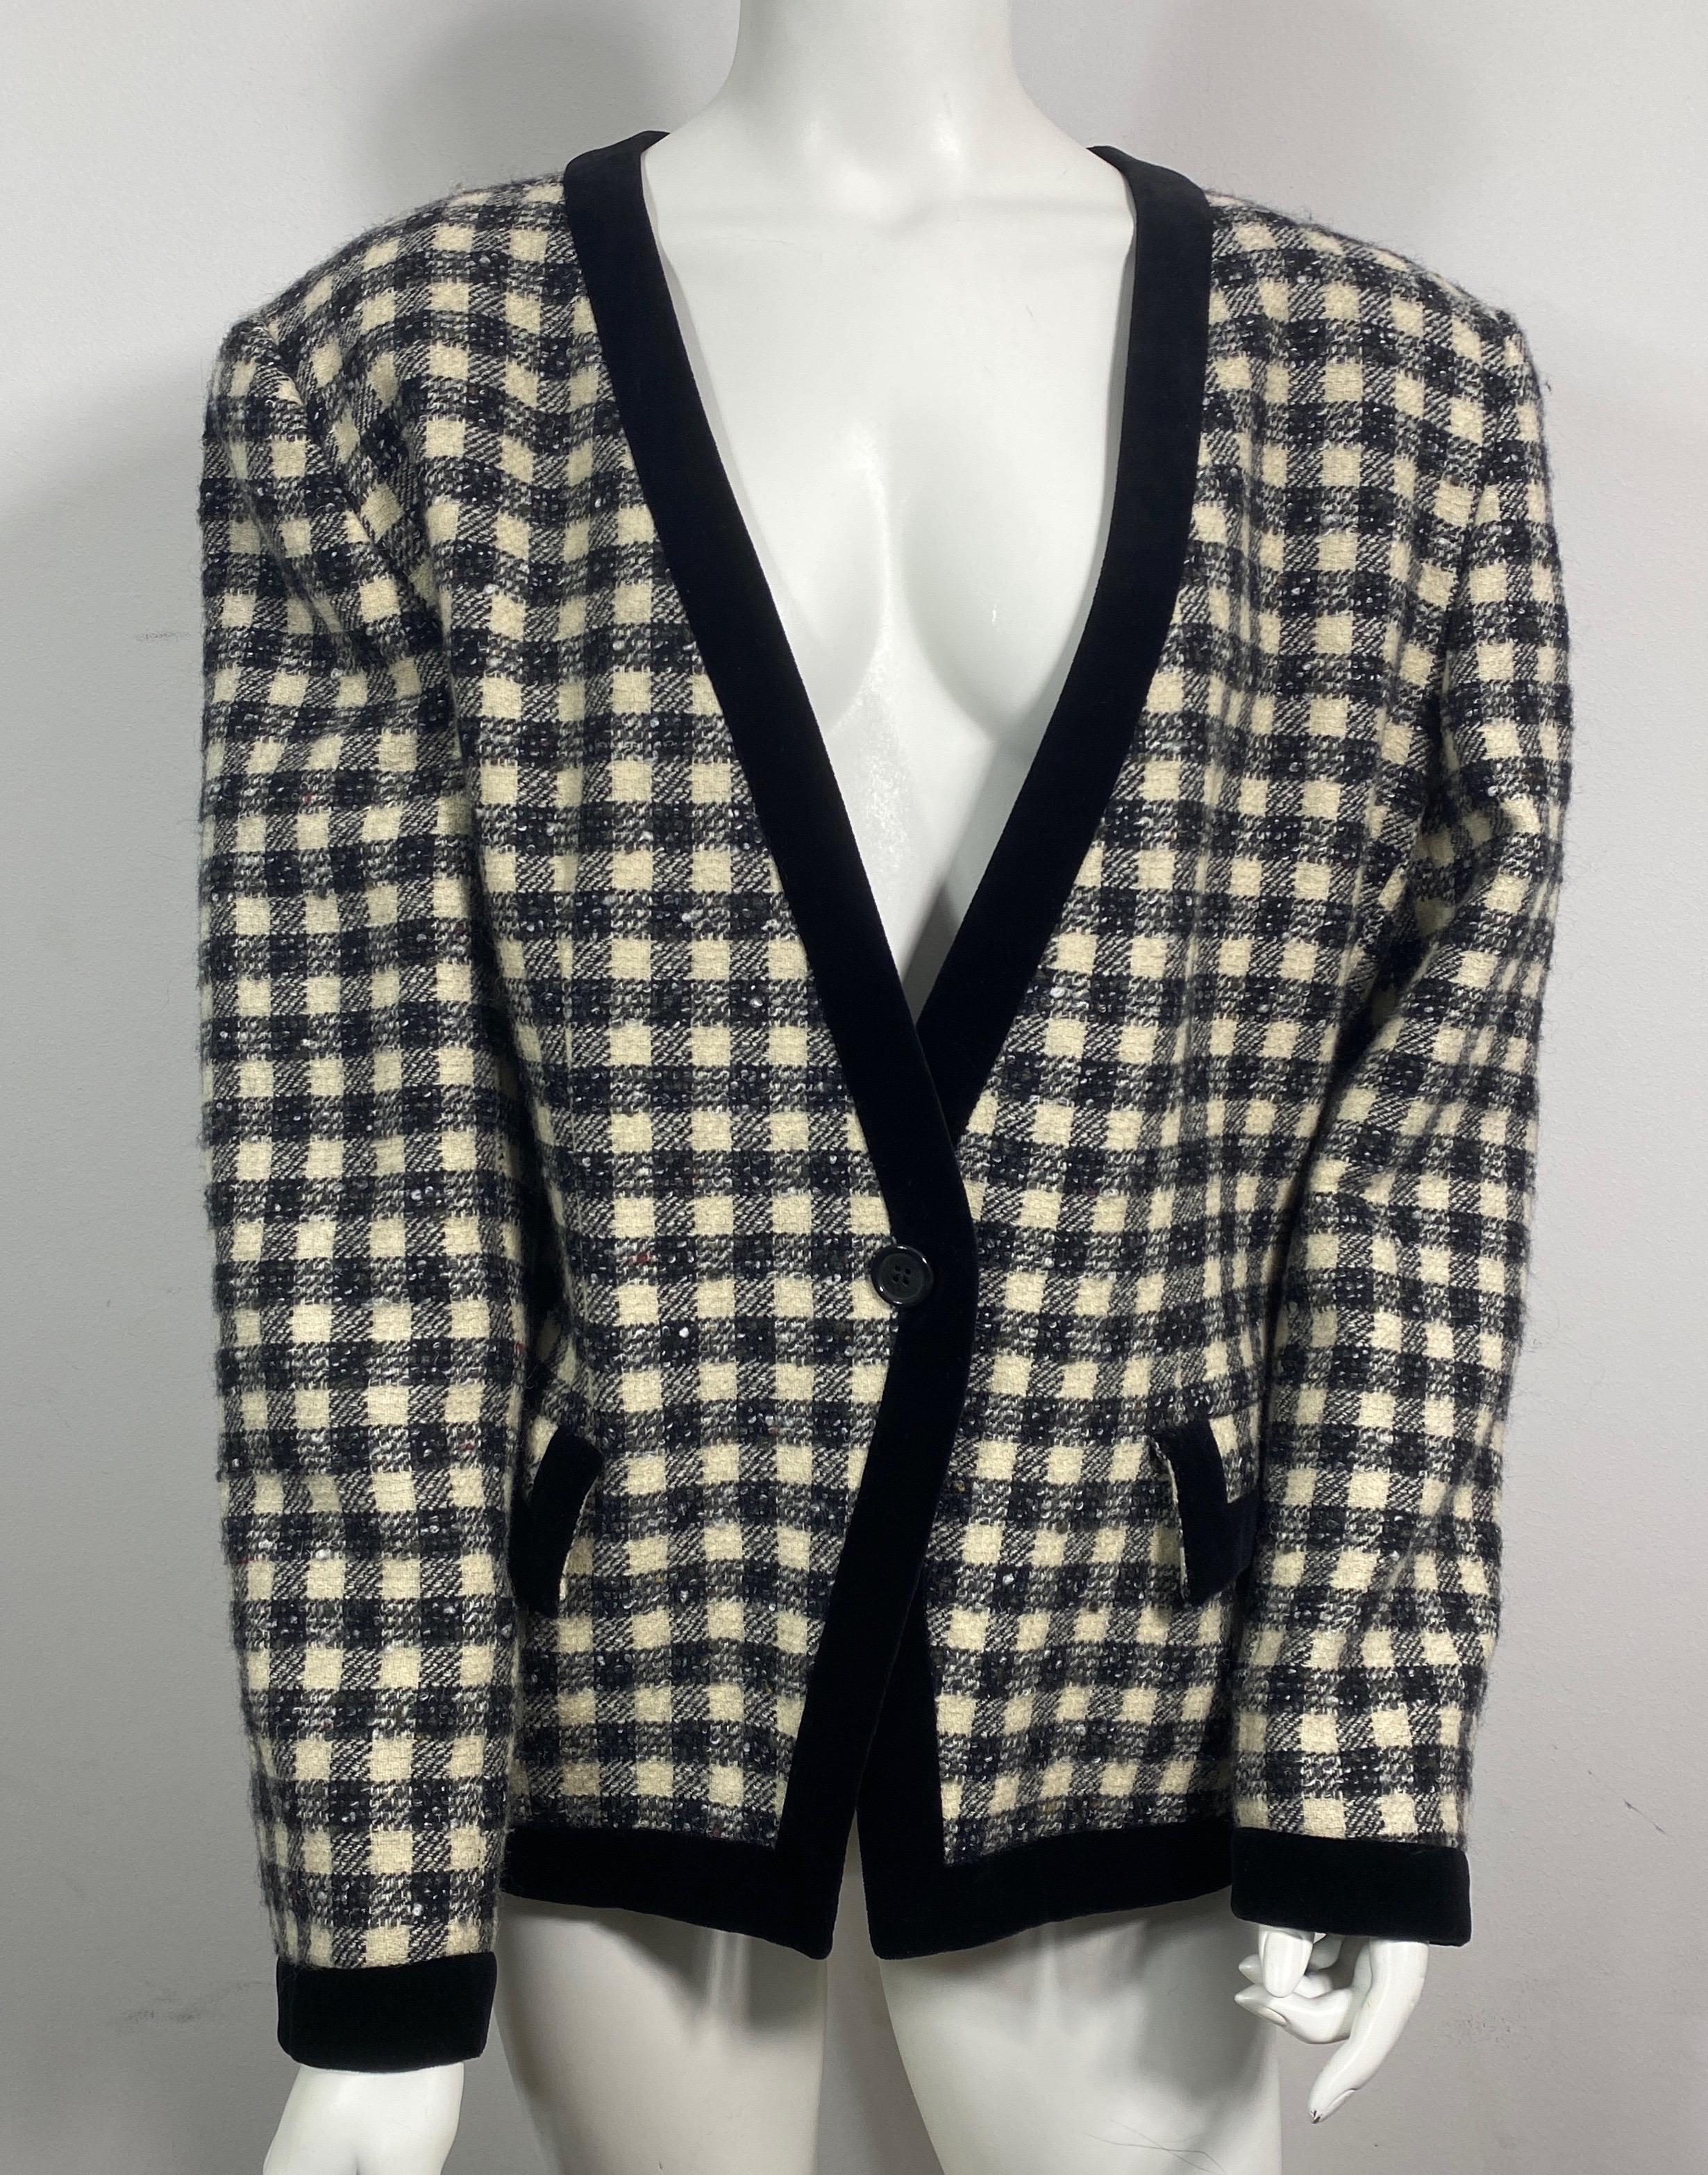 Giorgio Armani 1990’s Black and Ivory Tweed Checkered Jacket -Size 46  This 1990’s black and ivory Shepherd Check tweed jacket is full lined in a quilted silk like fabric and has a 1 “ black velvet trim throughout the jacket. The single breasted